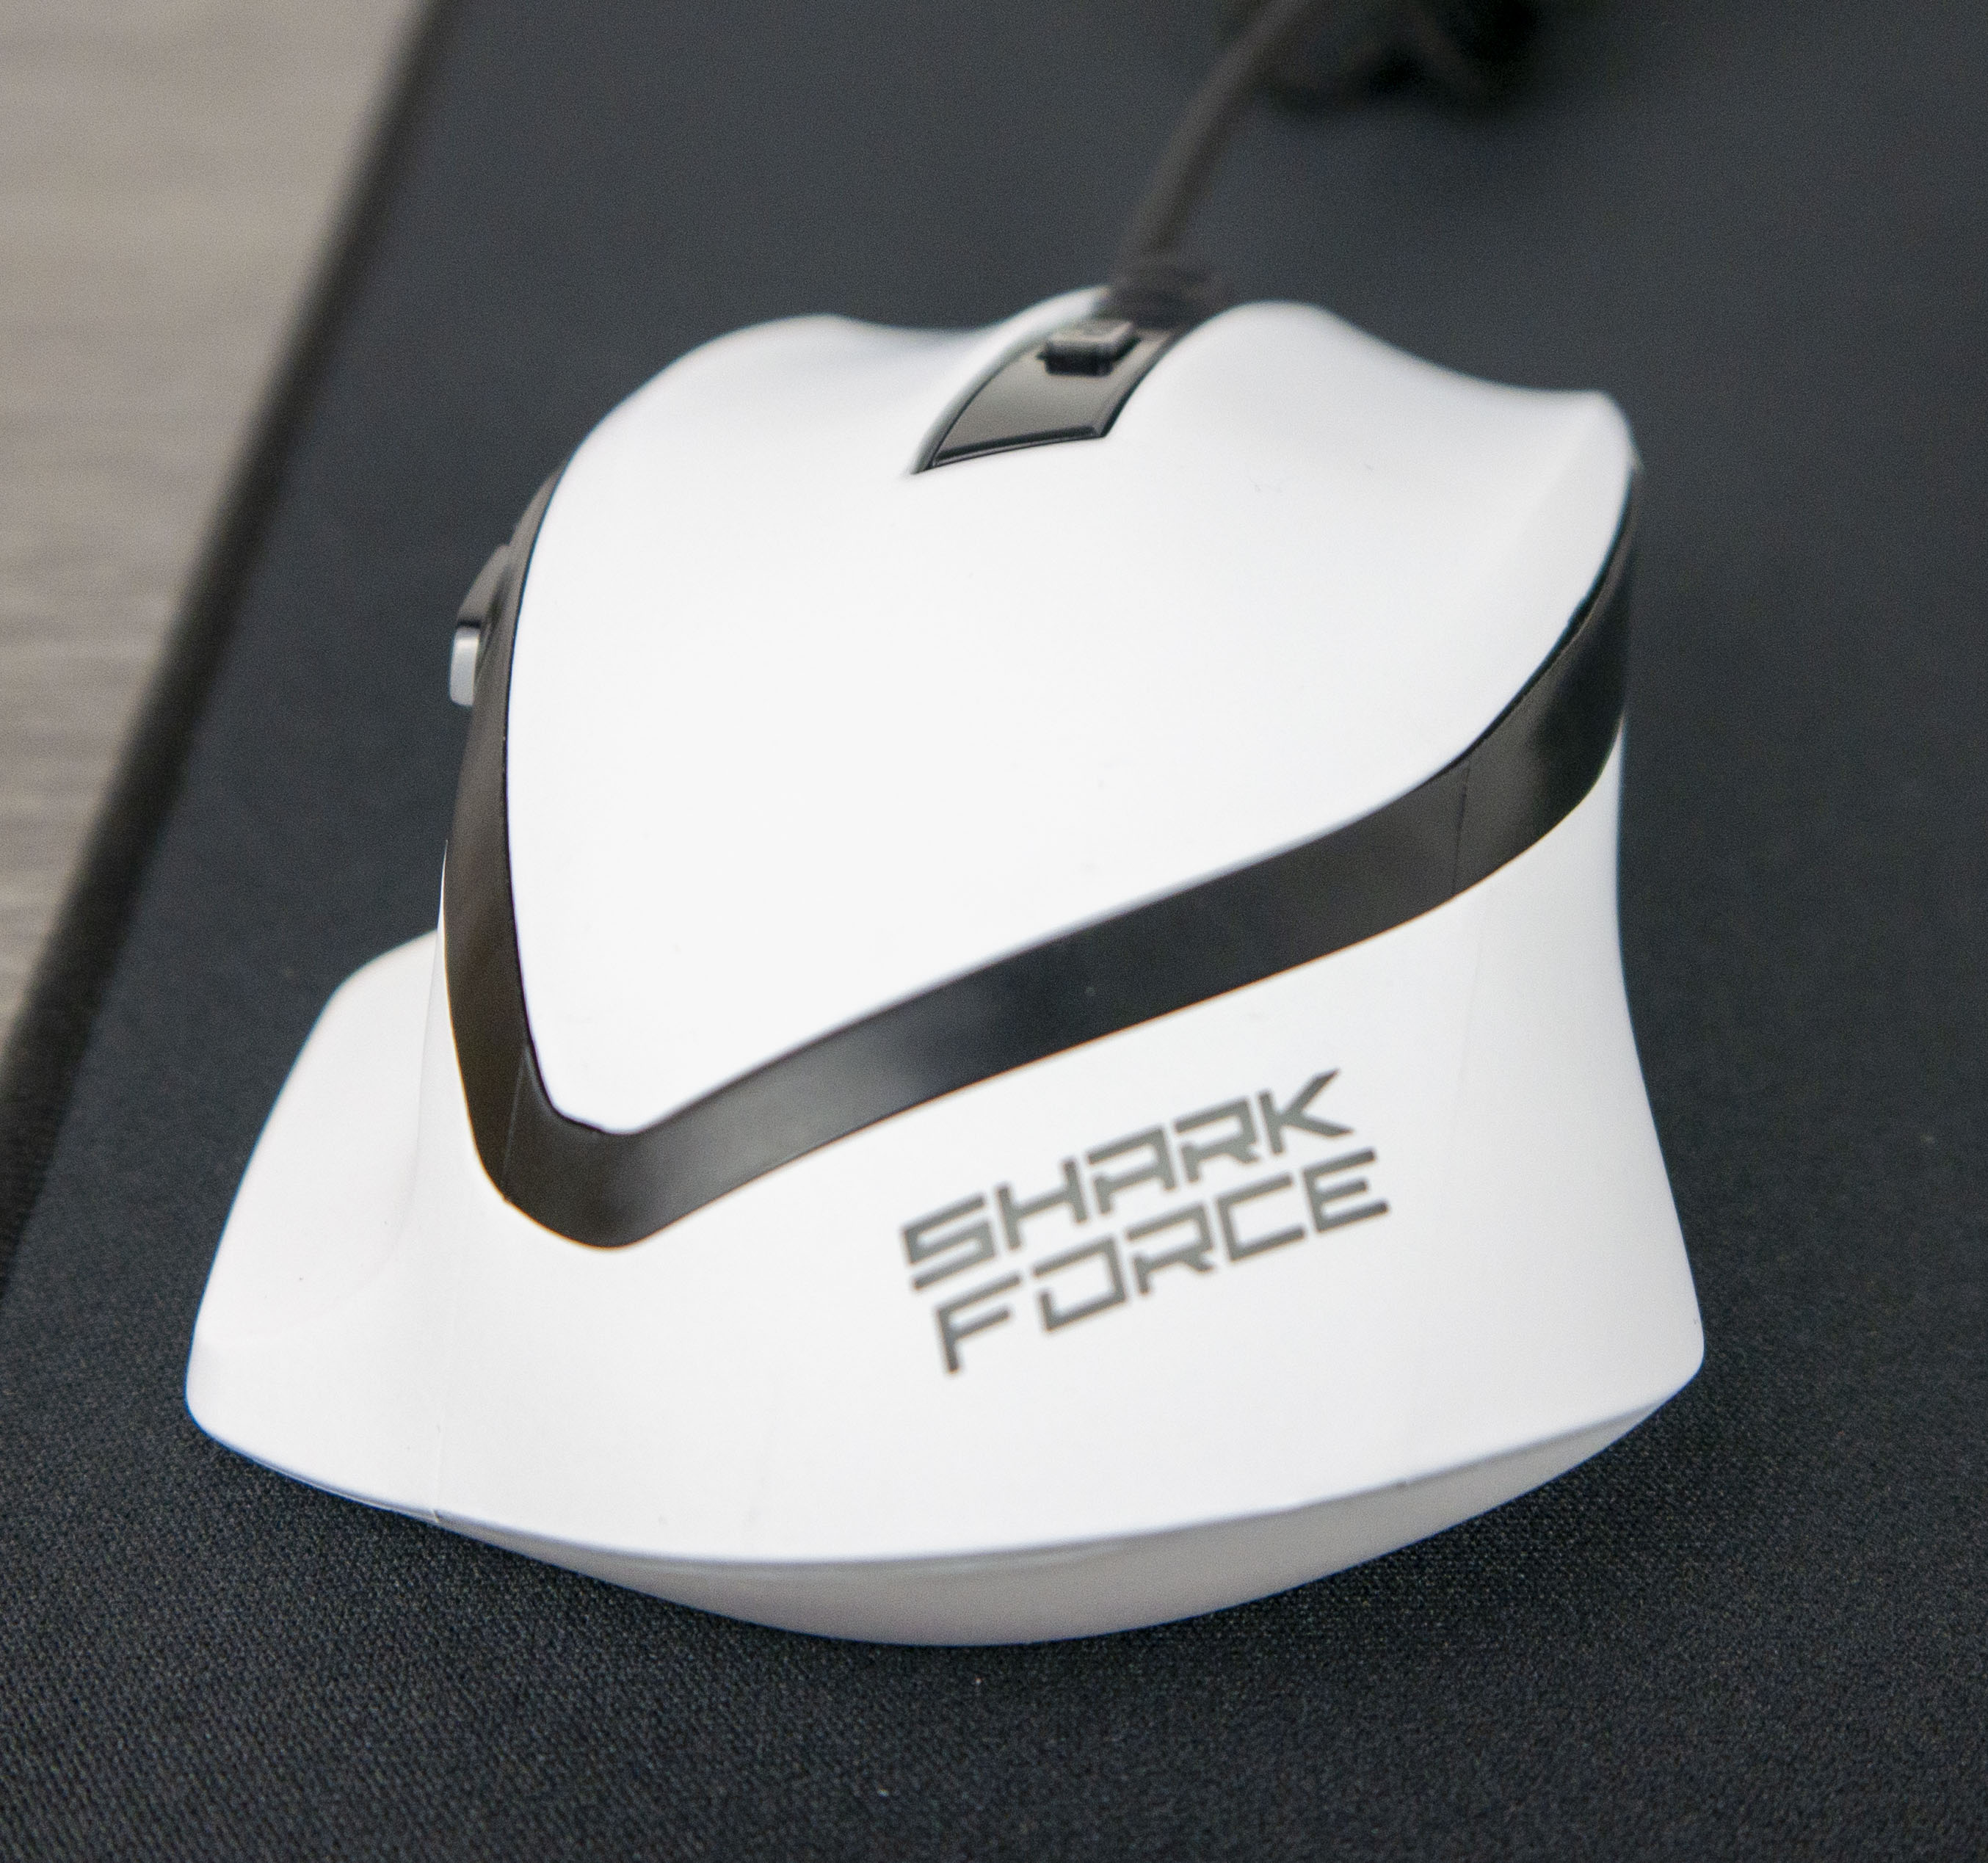 Cheap or low-priced? The Sharkoon Shark Force ll gaming mouse in test | PC-Mäuse